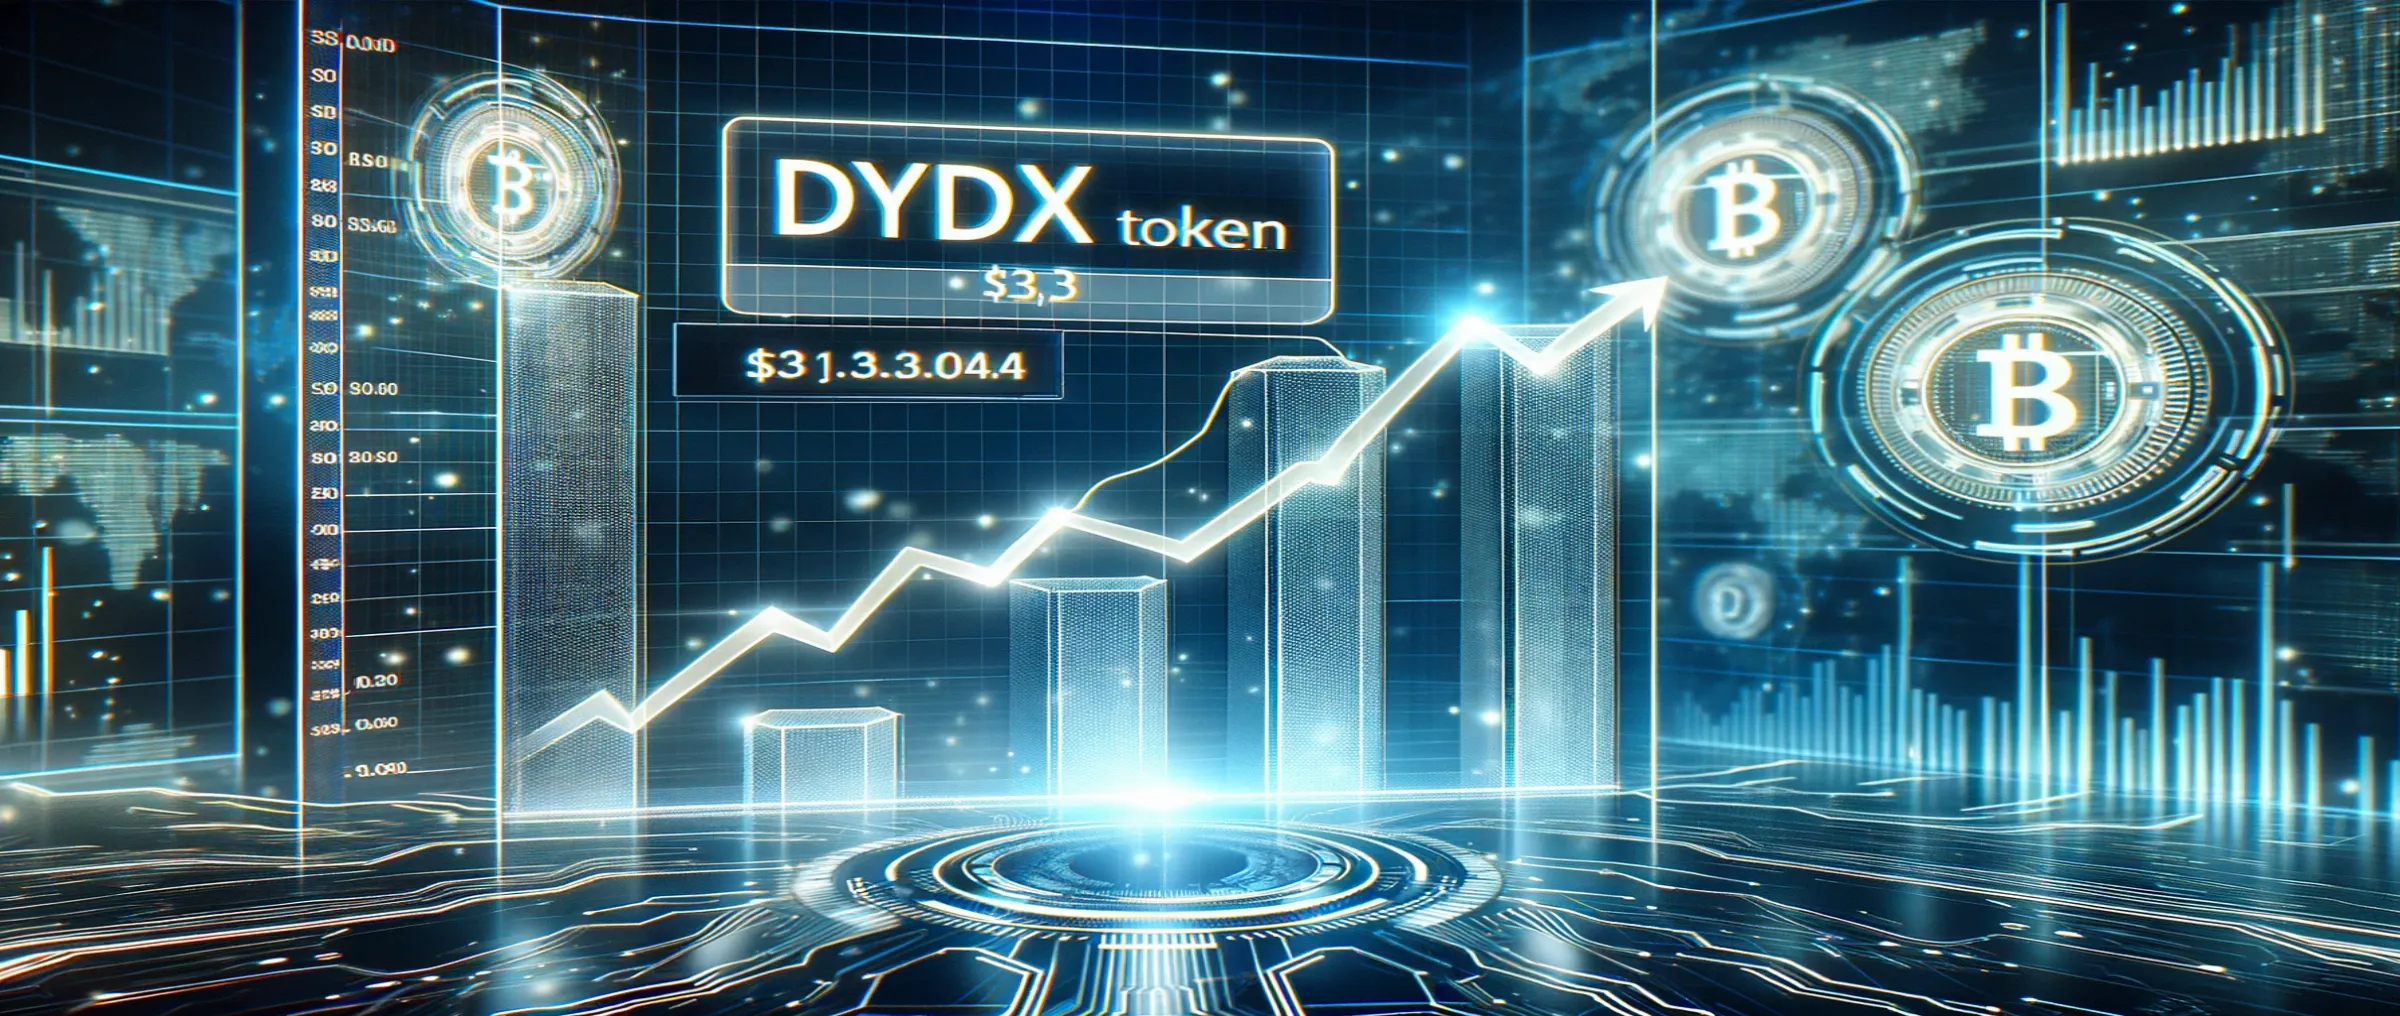 The success of DEX has raised the dYdX token above the $3 level